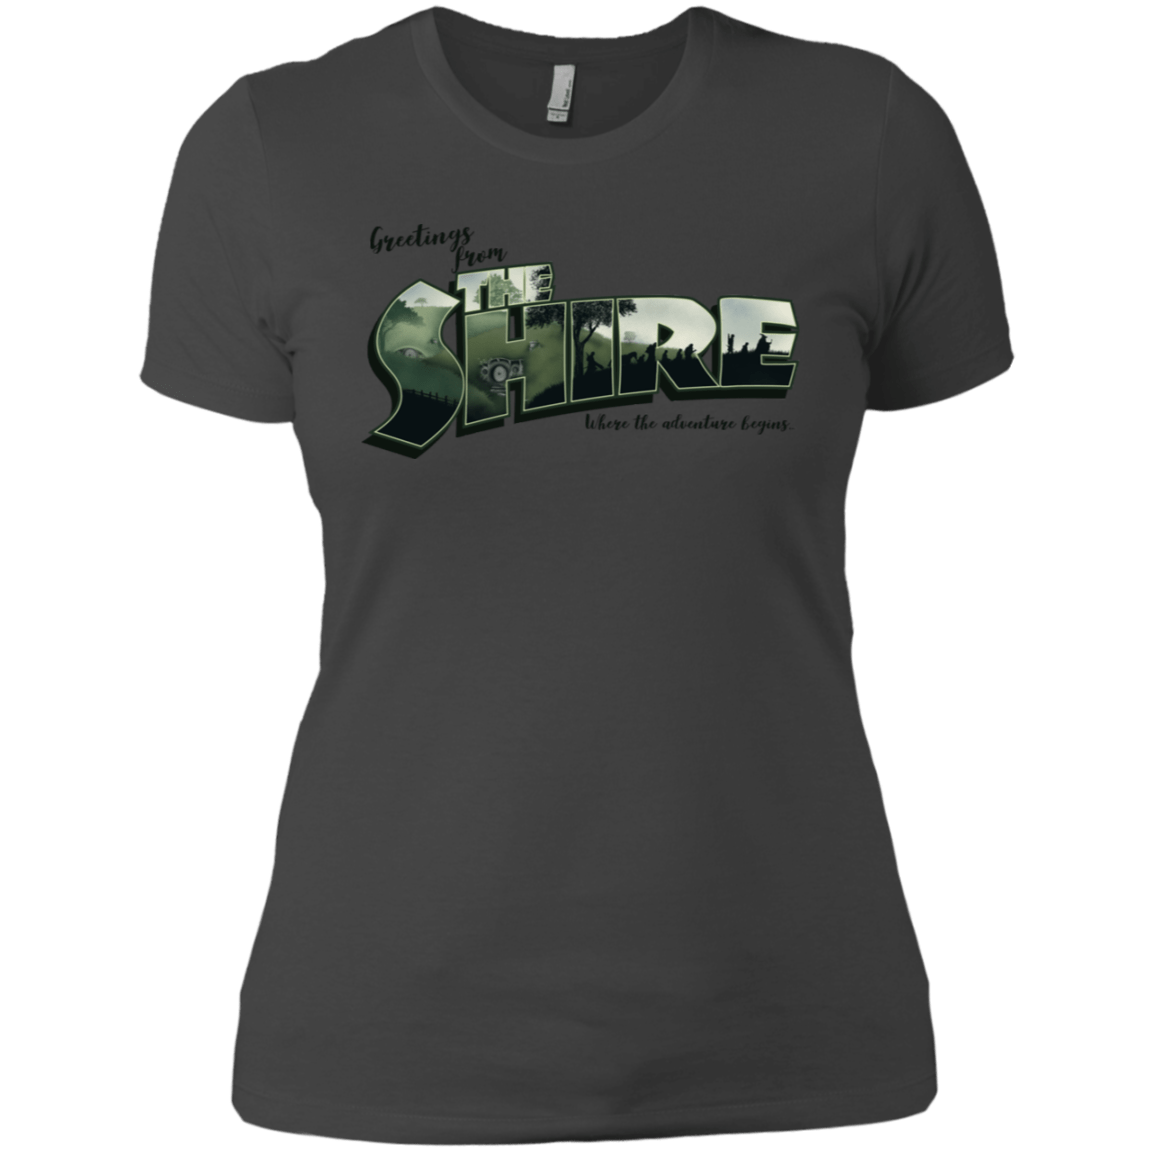 T-Shirts Heavy Metal / X-Small Greetings from the Shire Women's Premium T-Shirt